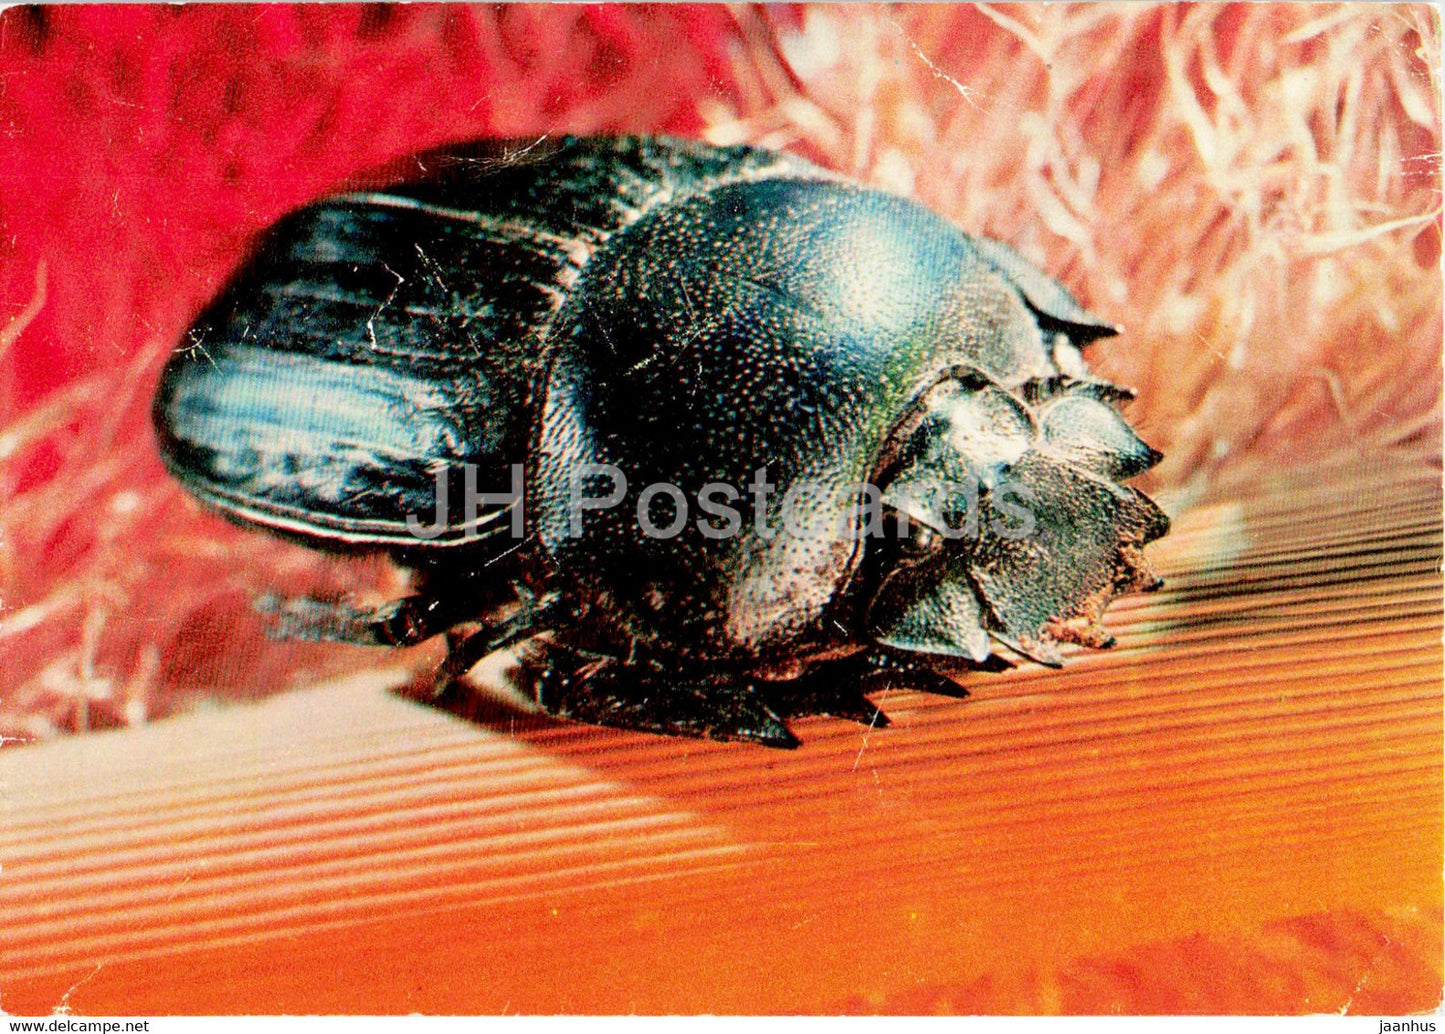 Sacred scarab - Scarabaeus sacer - insects - 1977 - Russia USSR - unused - JH Postcards